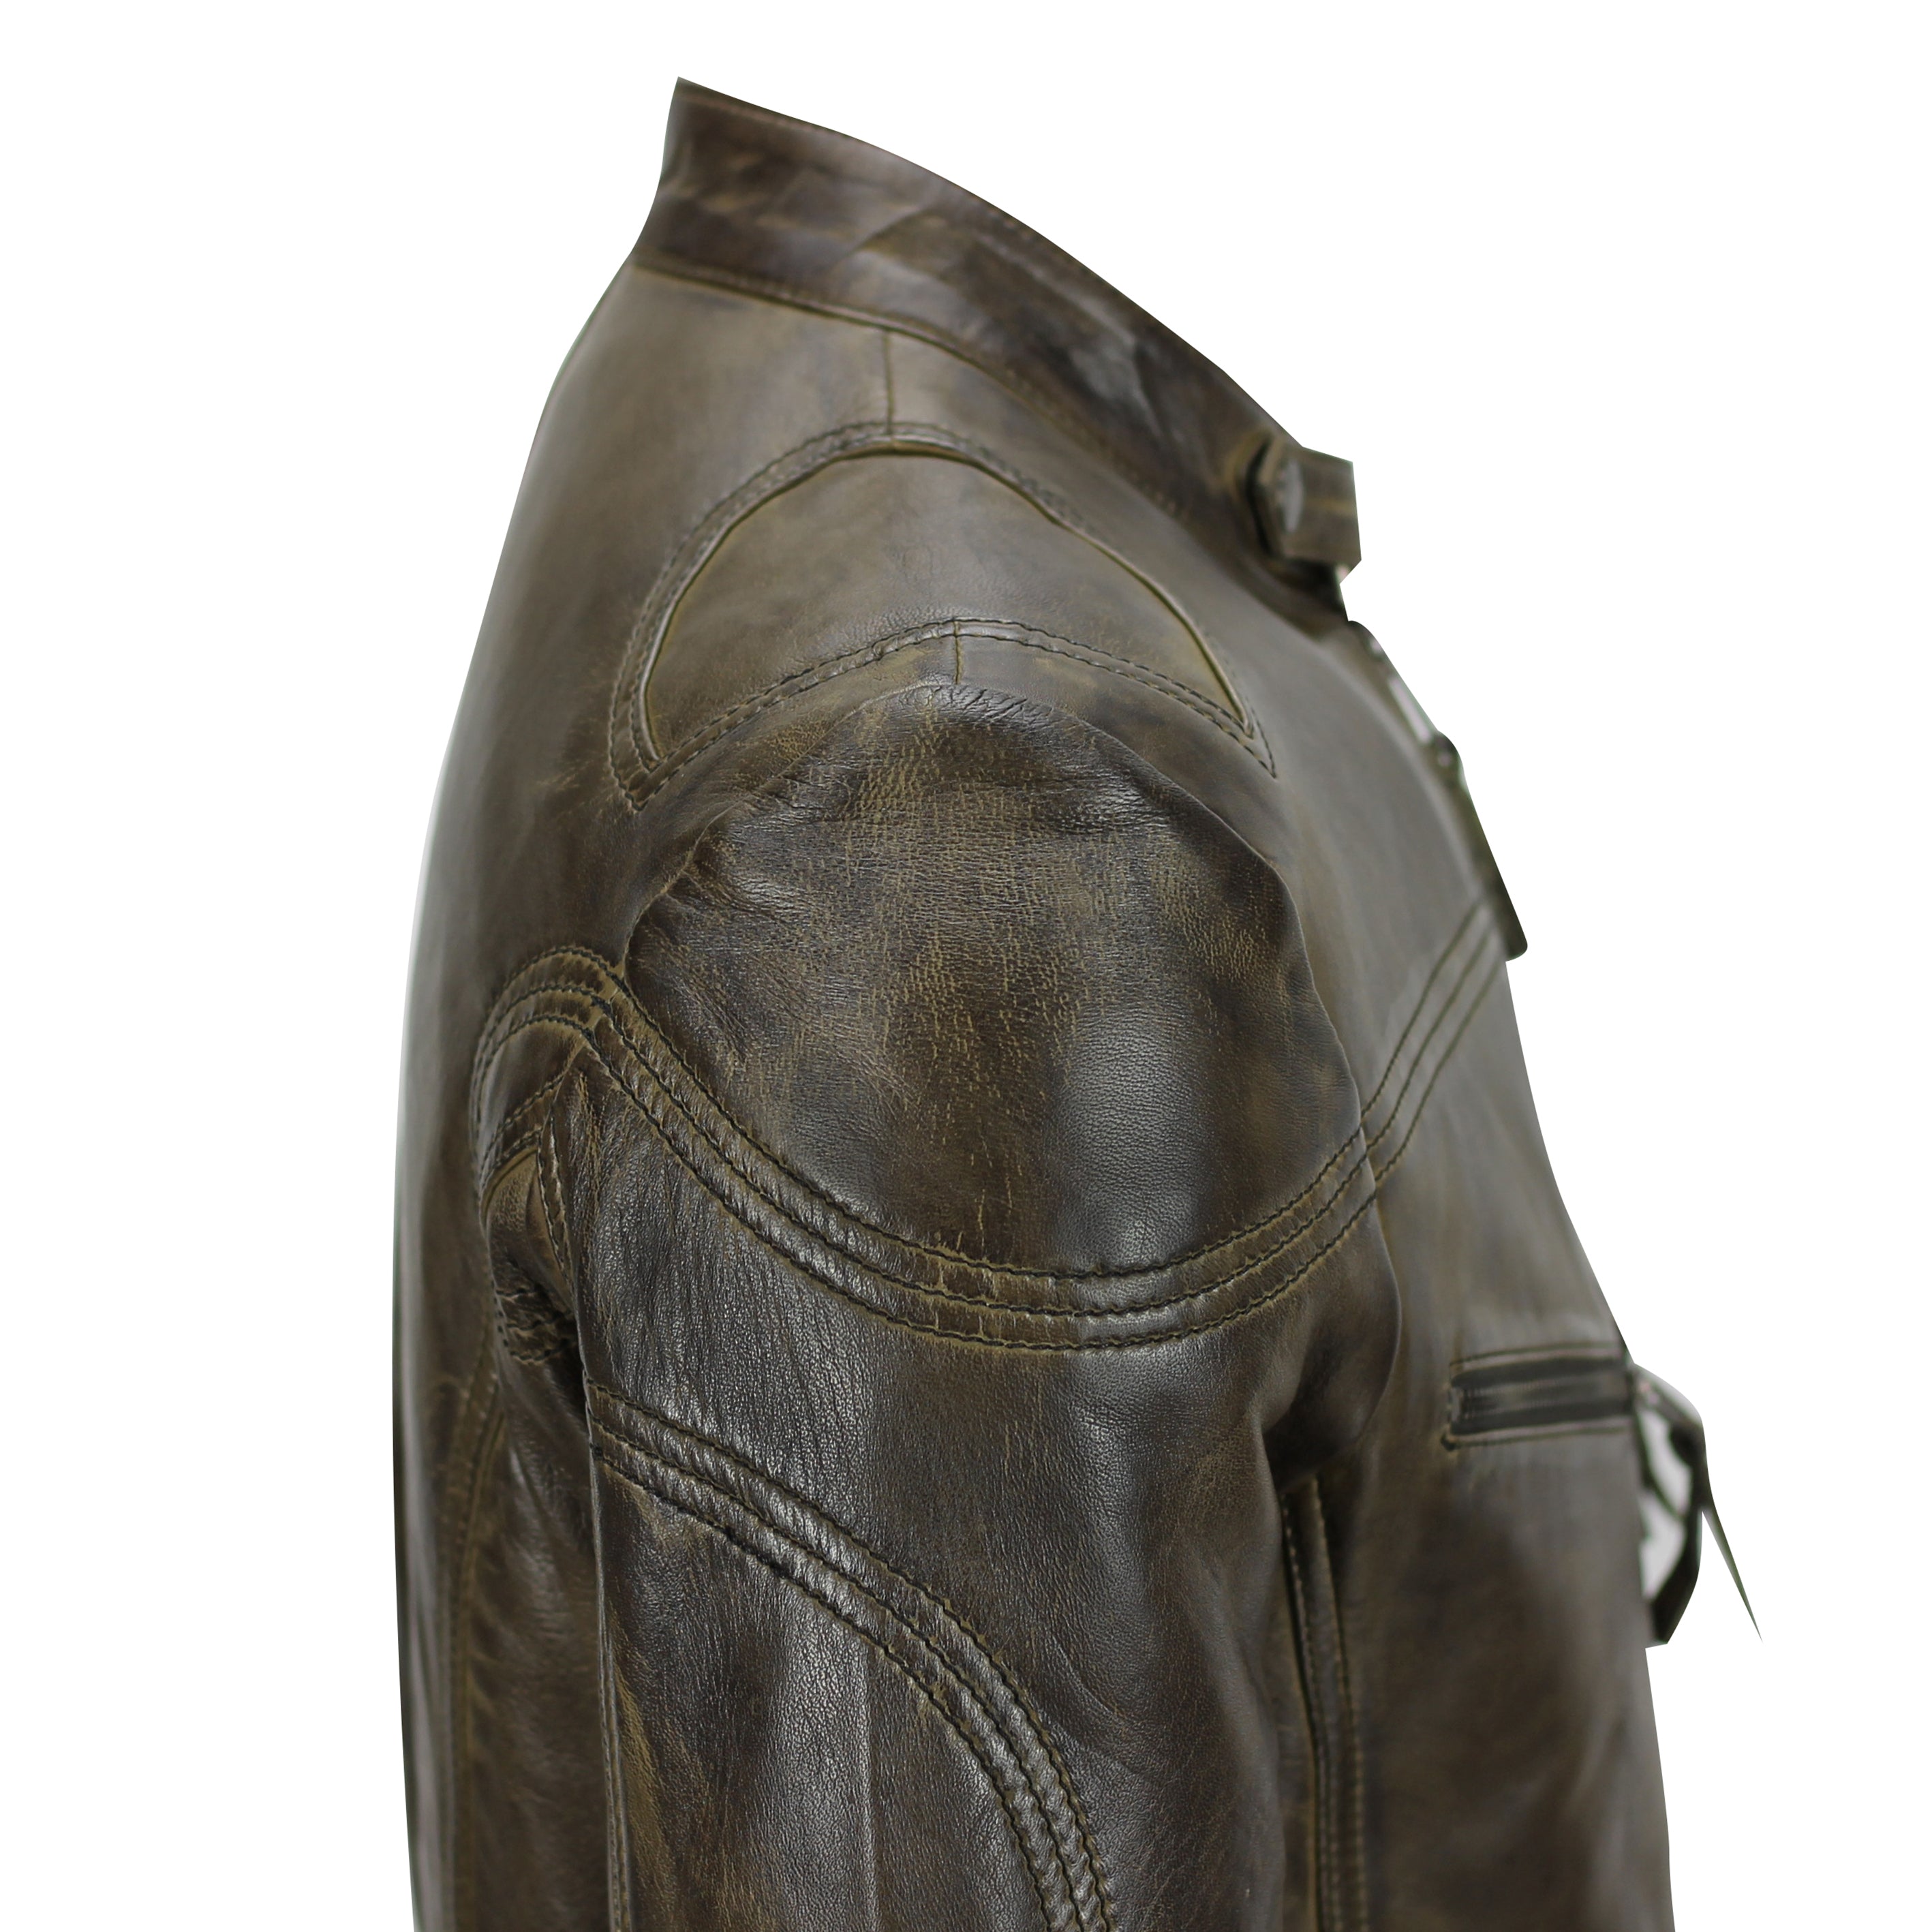 Mens Vintage Real Leather Brown Biker Style Zipped Pockets Casual Fitted Jacket